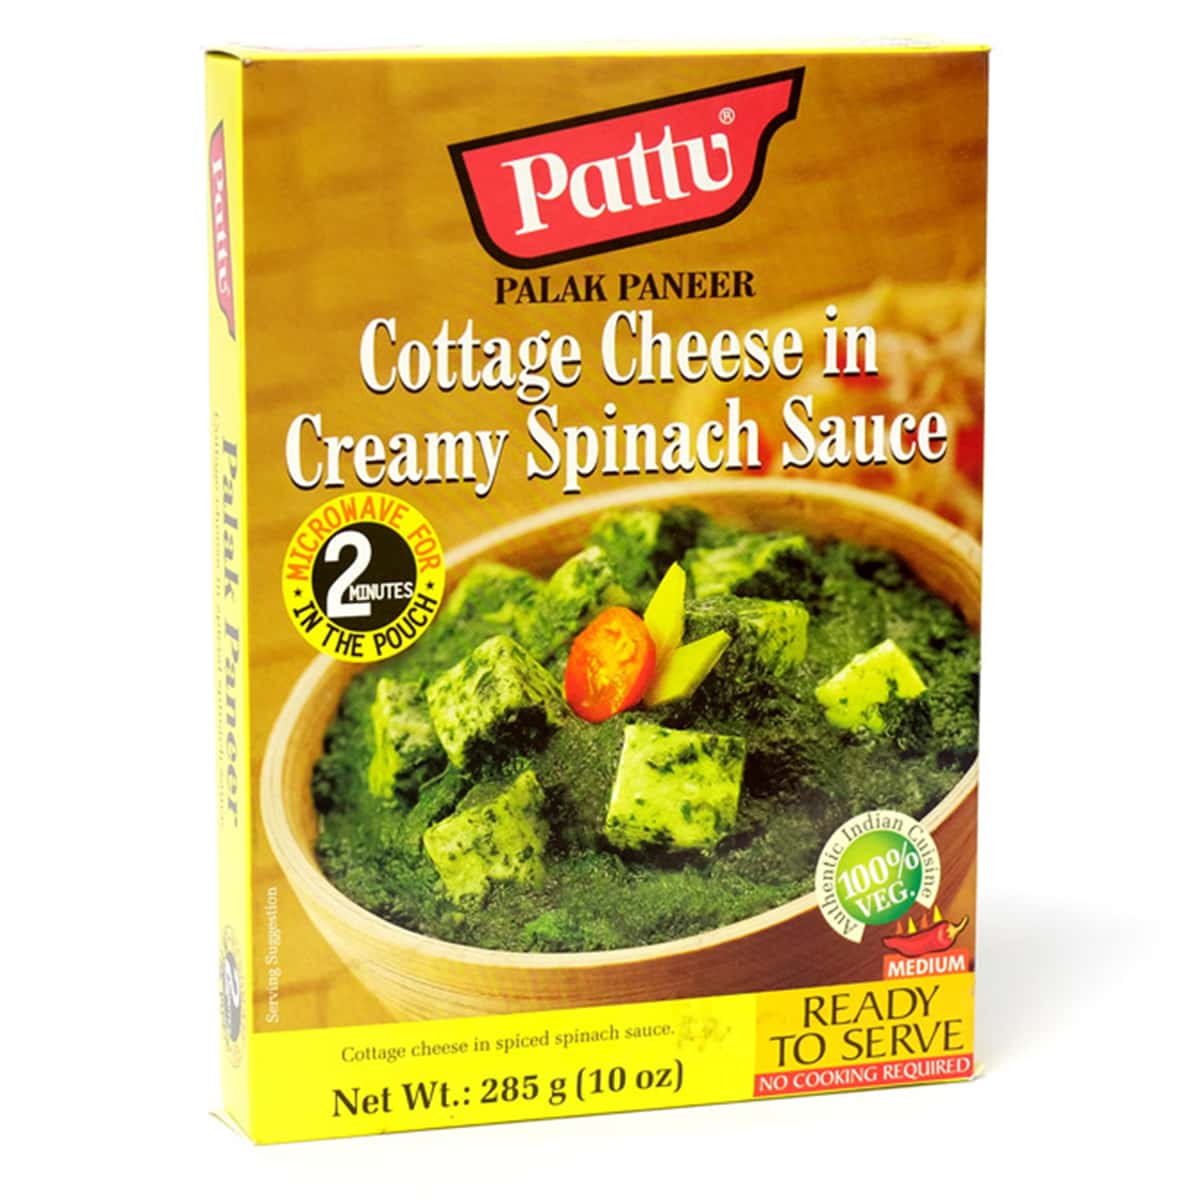 Buy Pattu Palak Paneer (Cottage Cheese in Creamy Spinach Sauce) Ready to Serve - 285 gm